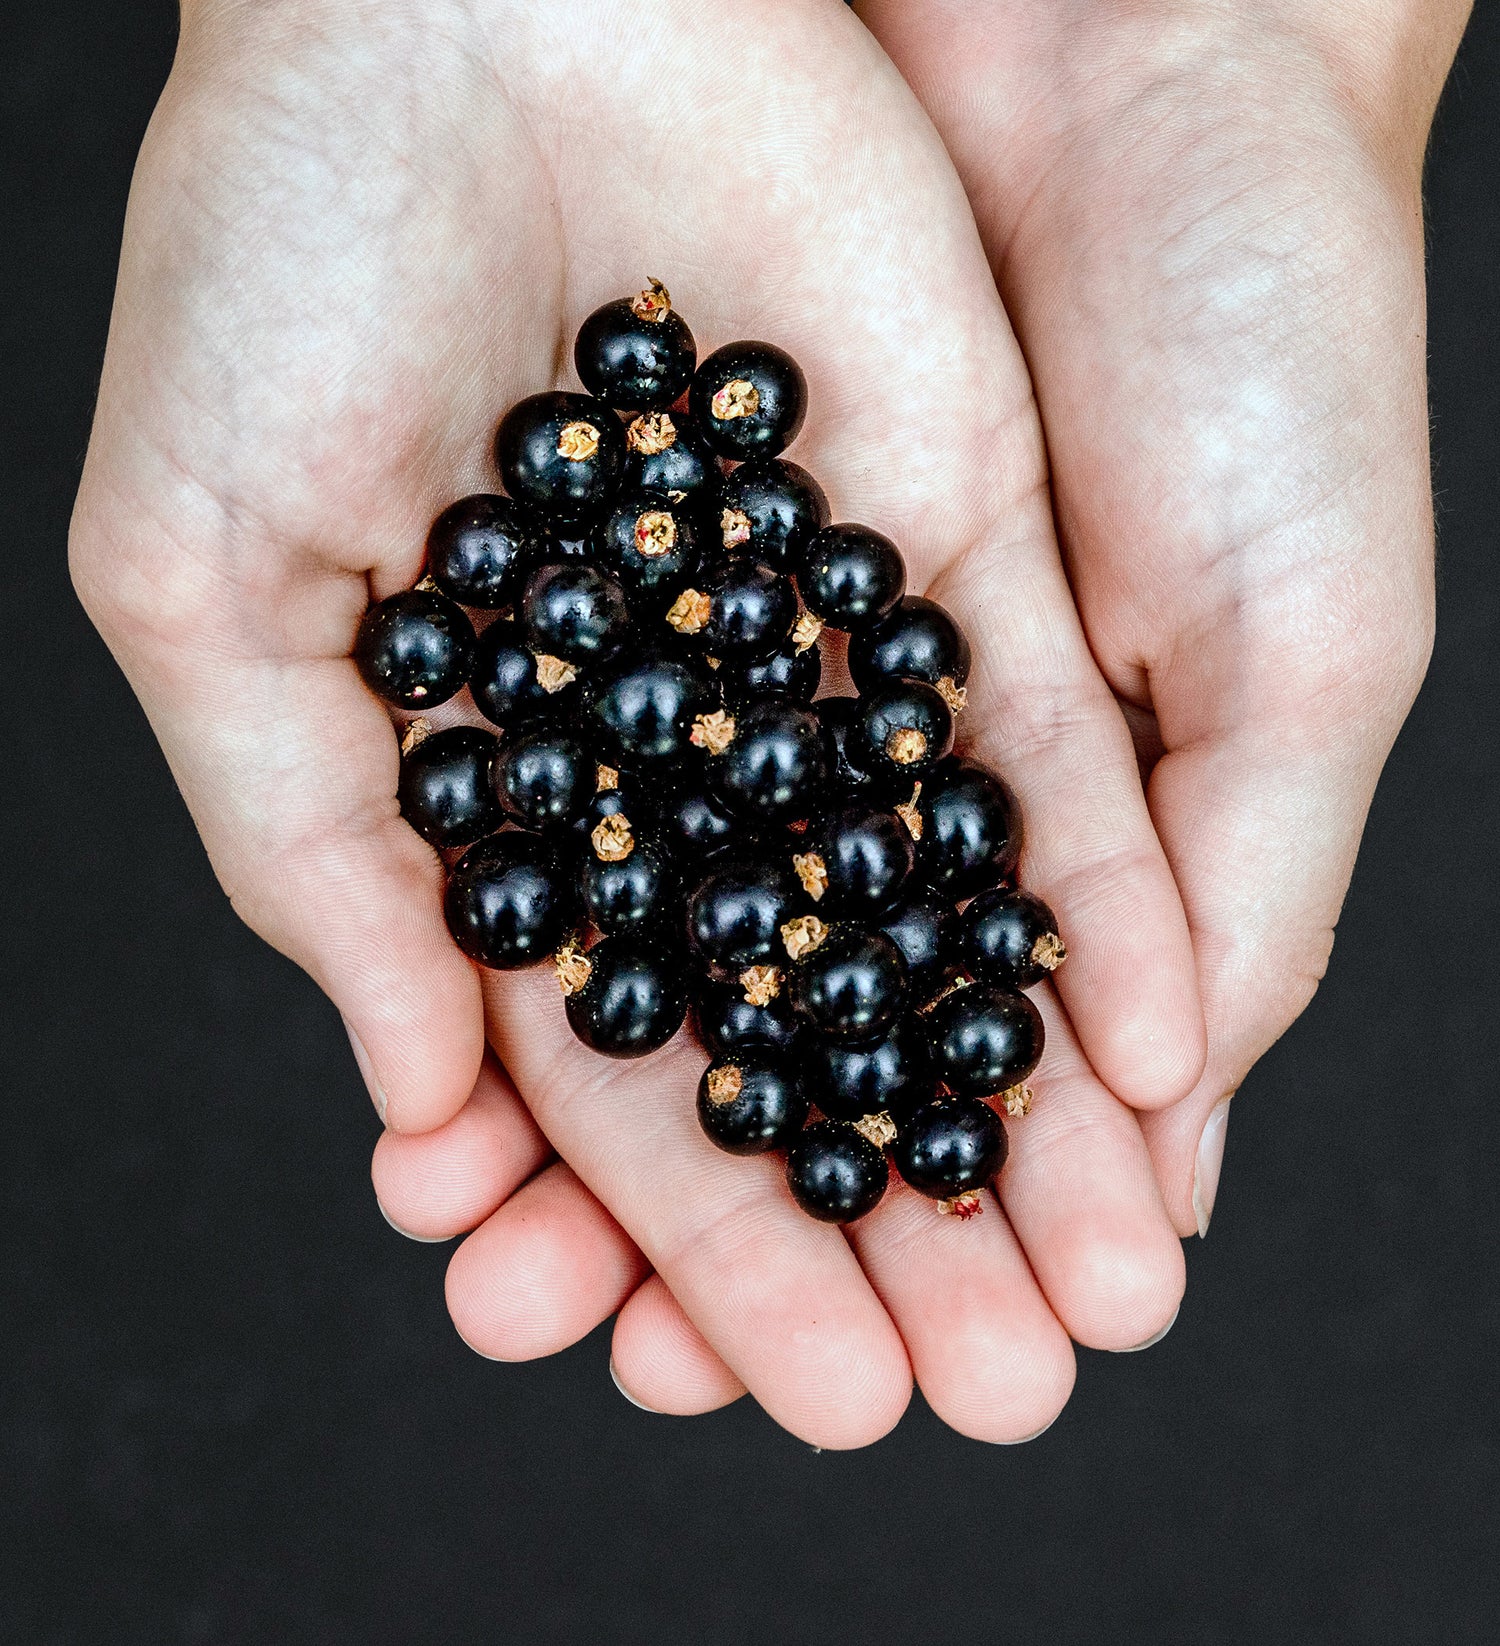 Person holding blackcurrants. CurraNZ® Health Supplement Capsules with 100% New Zealand Blackcurrants